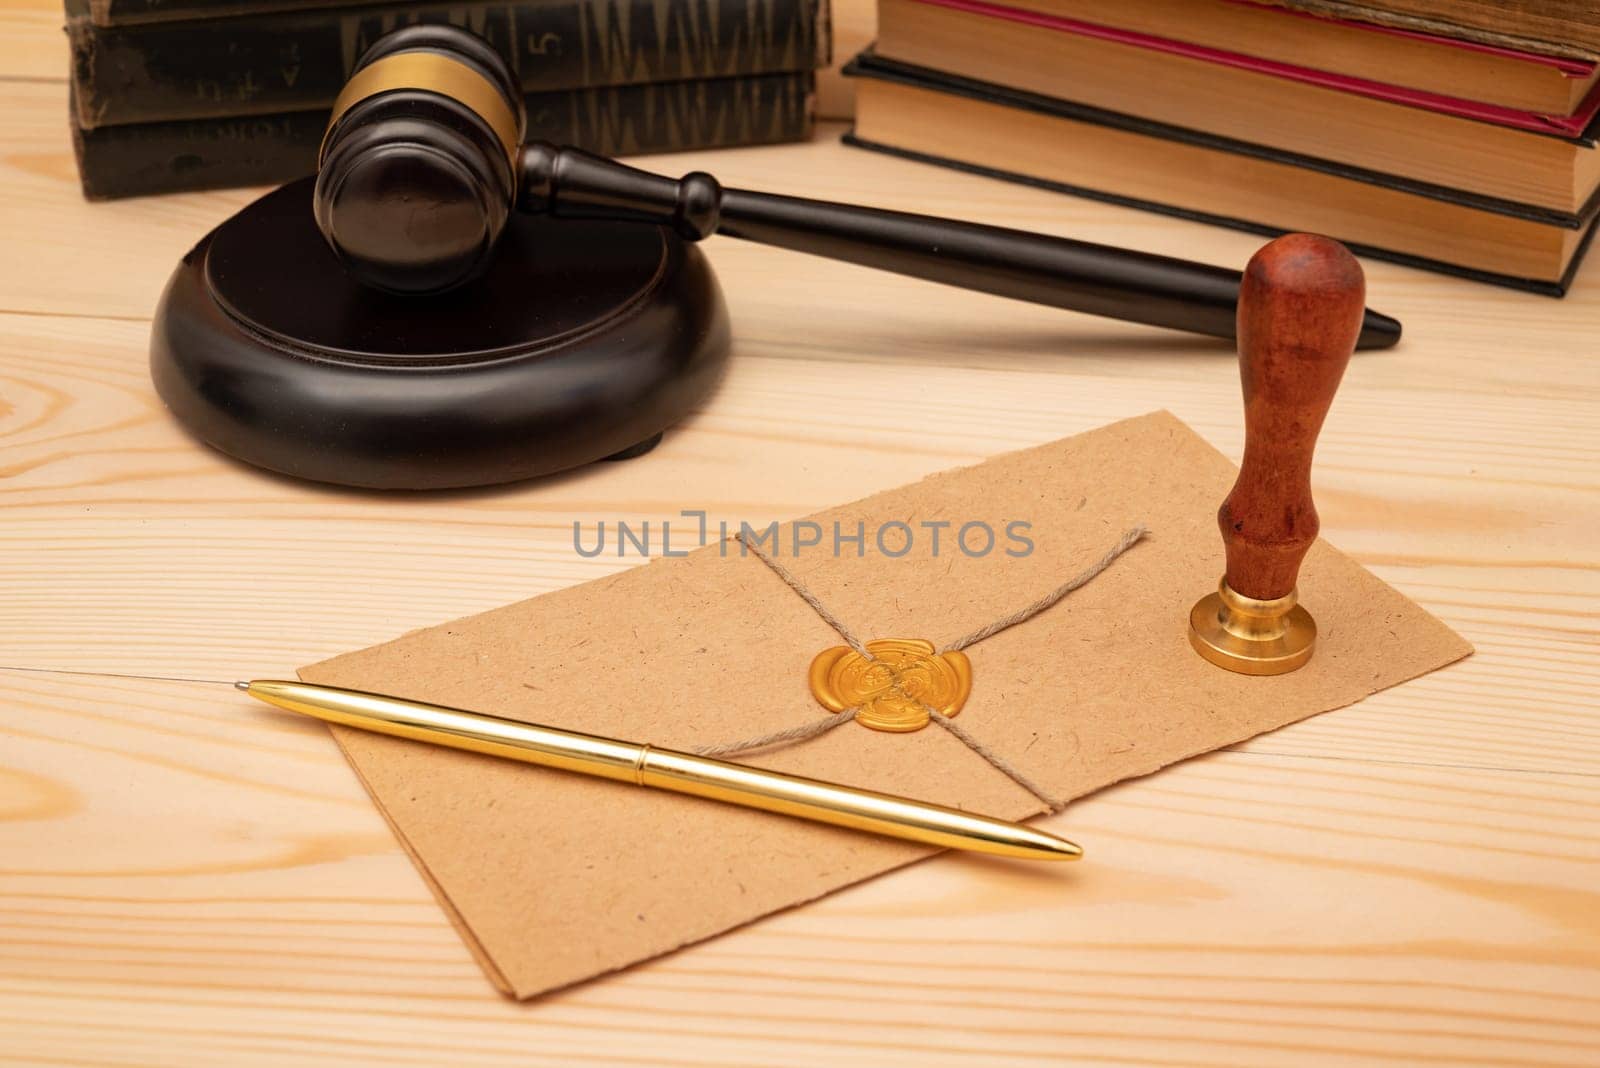 Vintage stamp, envelope and testament. Notary public tools